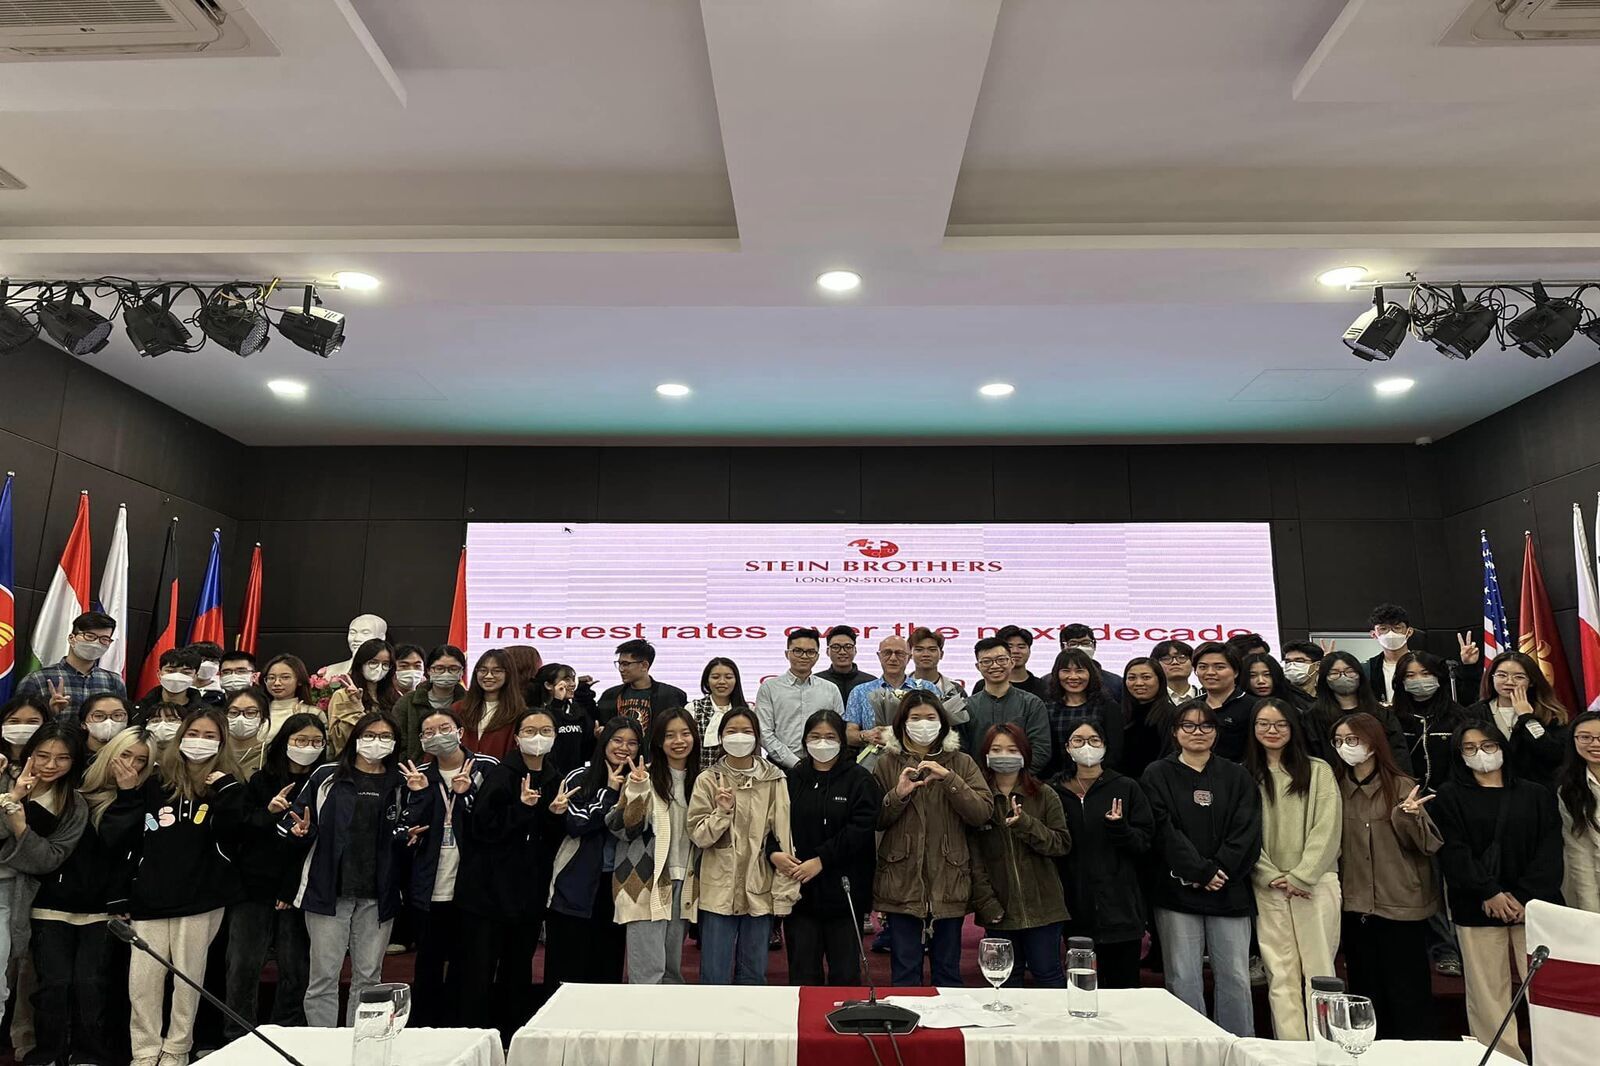 [RECAP] Monday Finance and Banking series tháng 3/2023